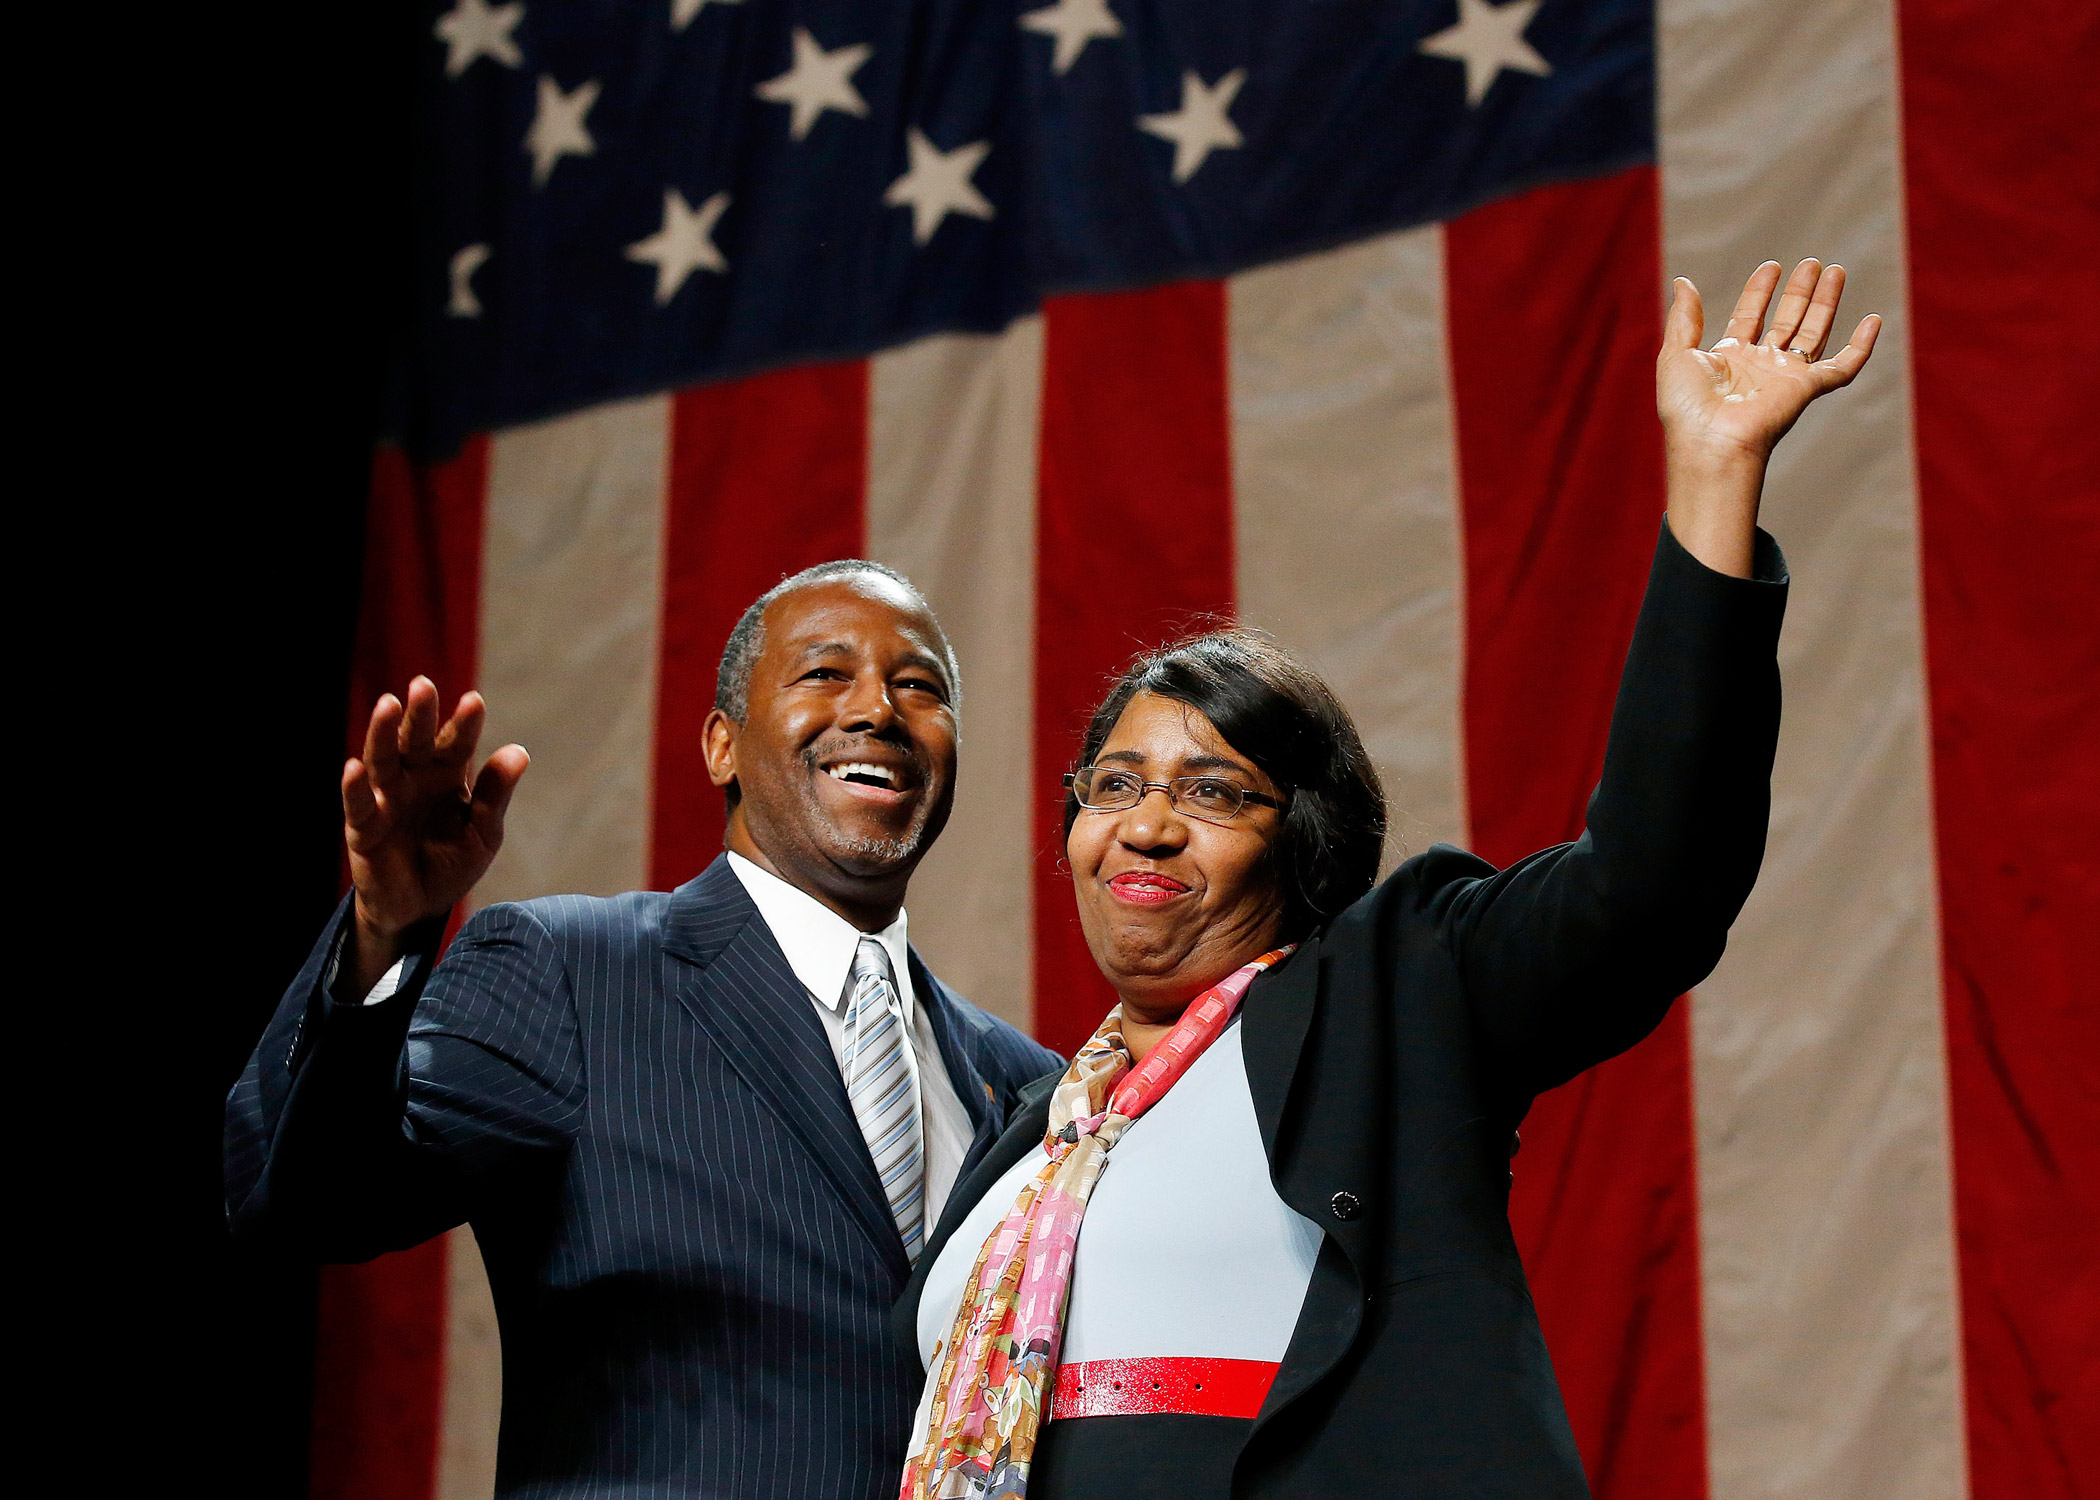 Ben Carson and his wife Candy on Aug. 18, 2015 in Phoenix. (Ross D. Franklin—AP)